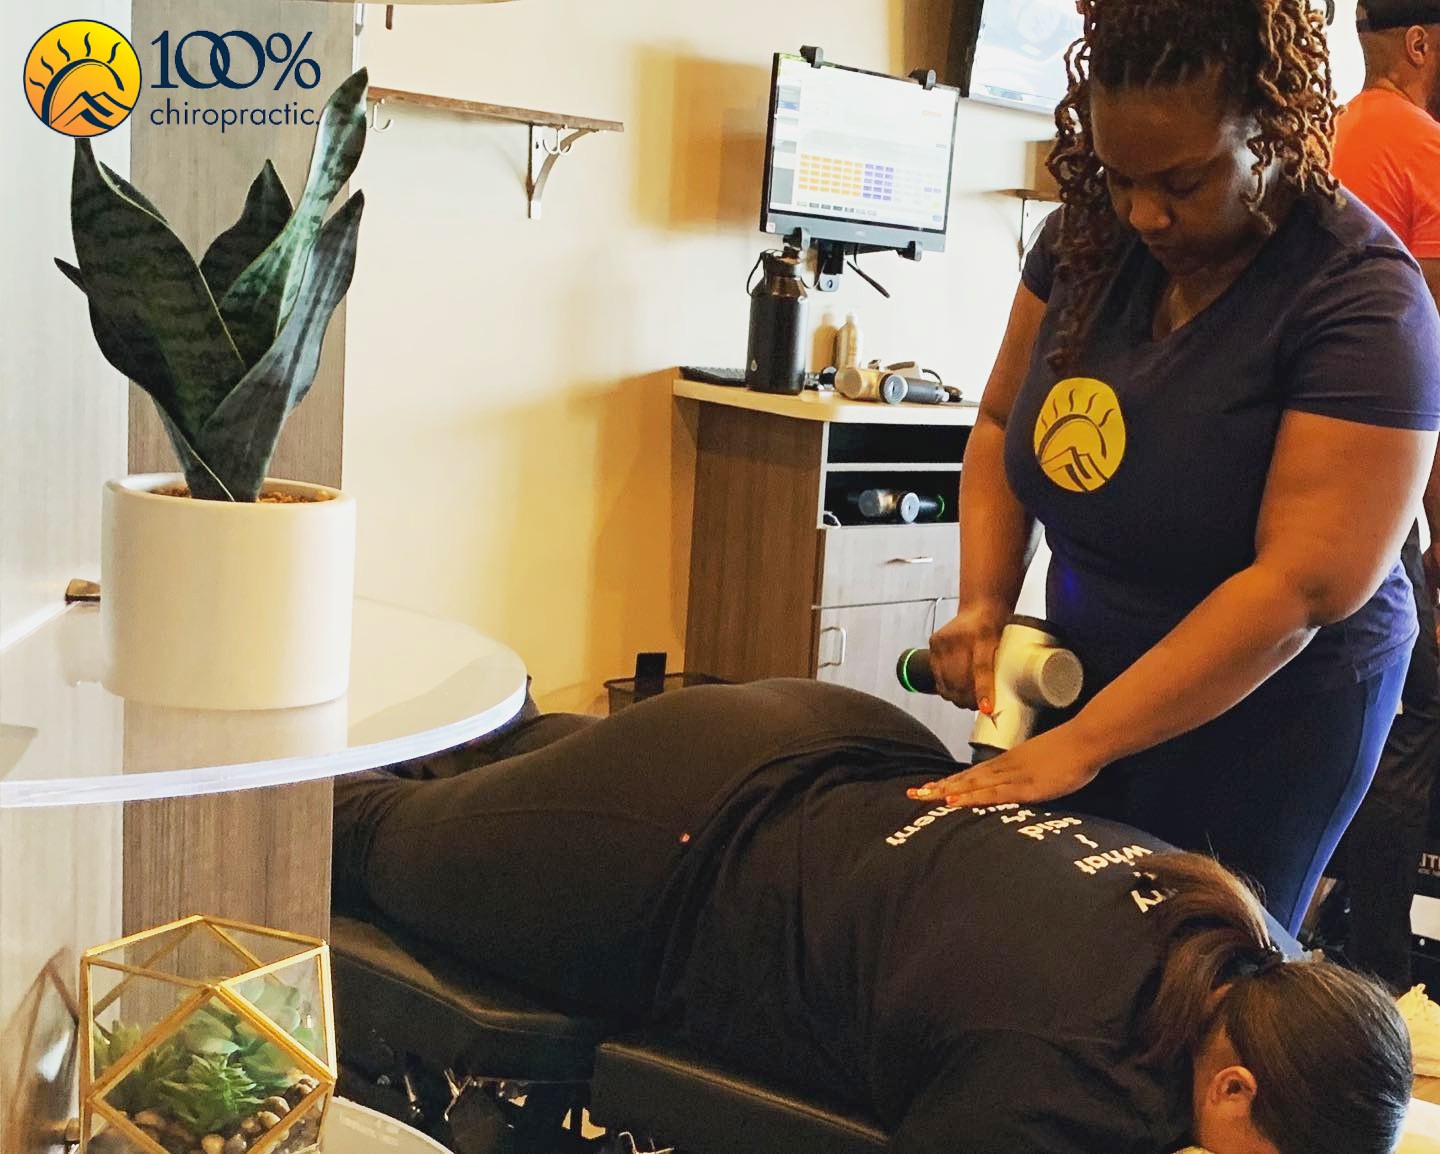 Our chiropractors get adjusted too! At 100%, you’ll find that our services are catered towards the entire family’s healing. Our wellness center is dedicated to ensuring optimal care for our patients b